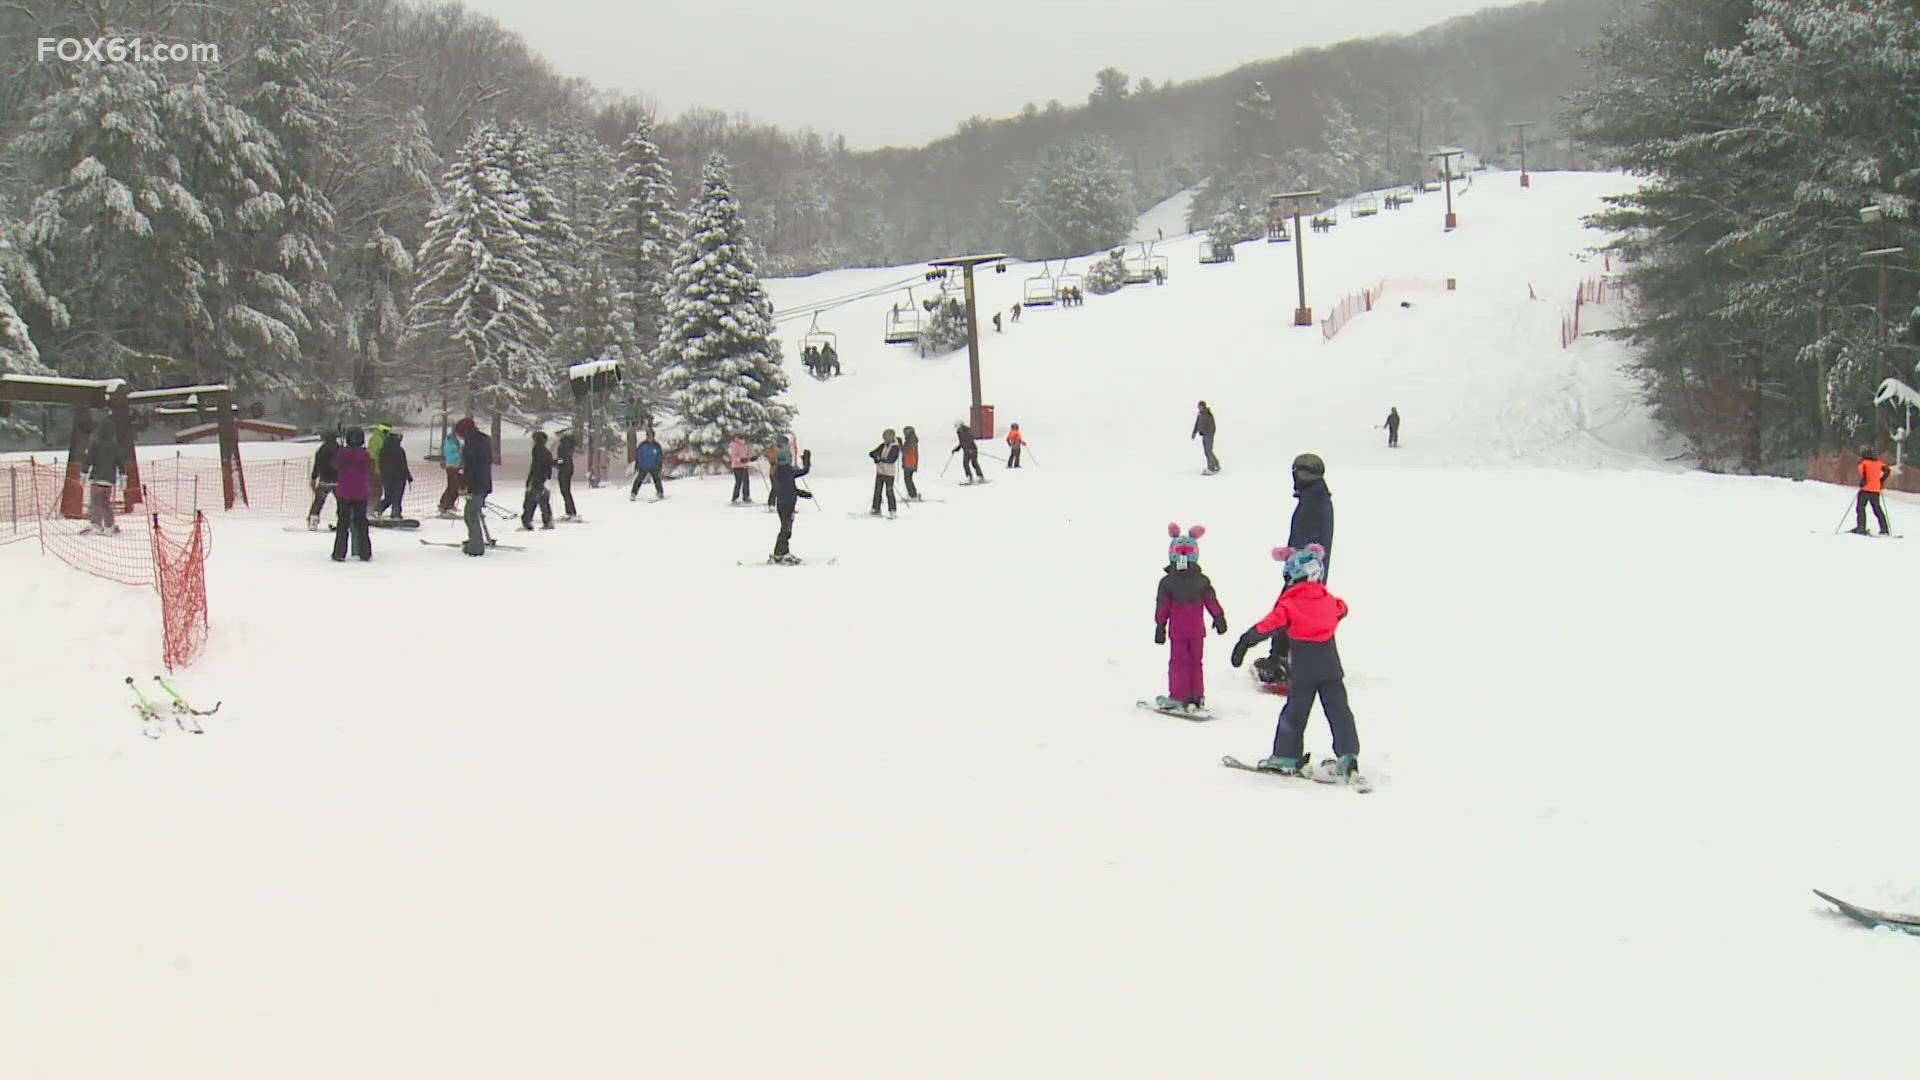 Since Ski Sundown in New Hartford opened in mid-December, this is the first significant snowfall of the year.